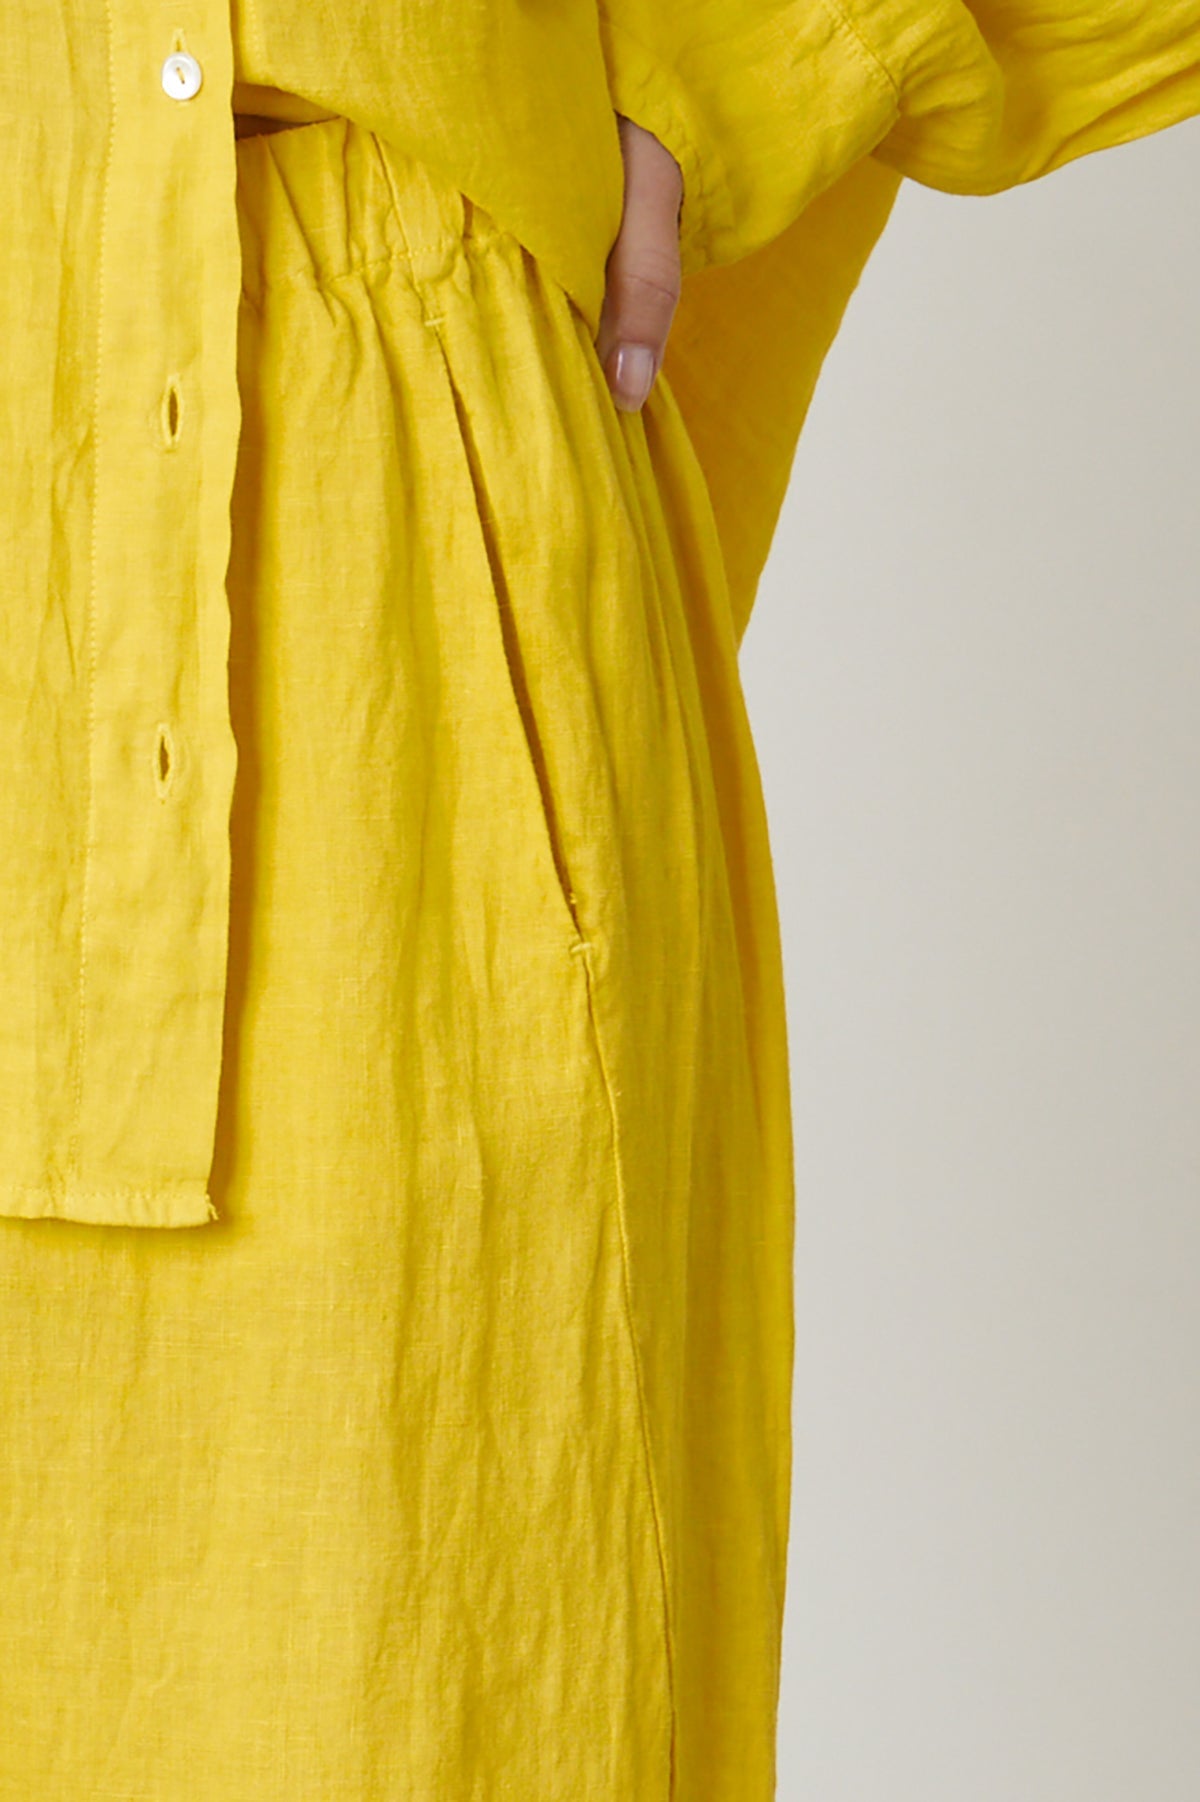 Lola pant in bright yellow sun colored linen close up detail of hip and pocket front-35206342312129